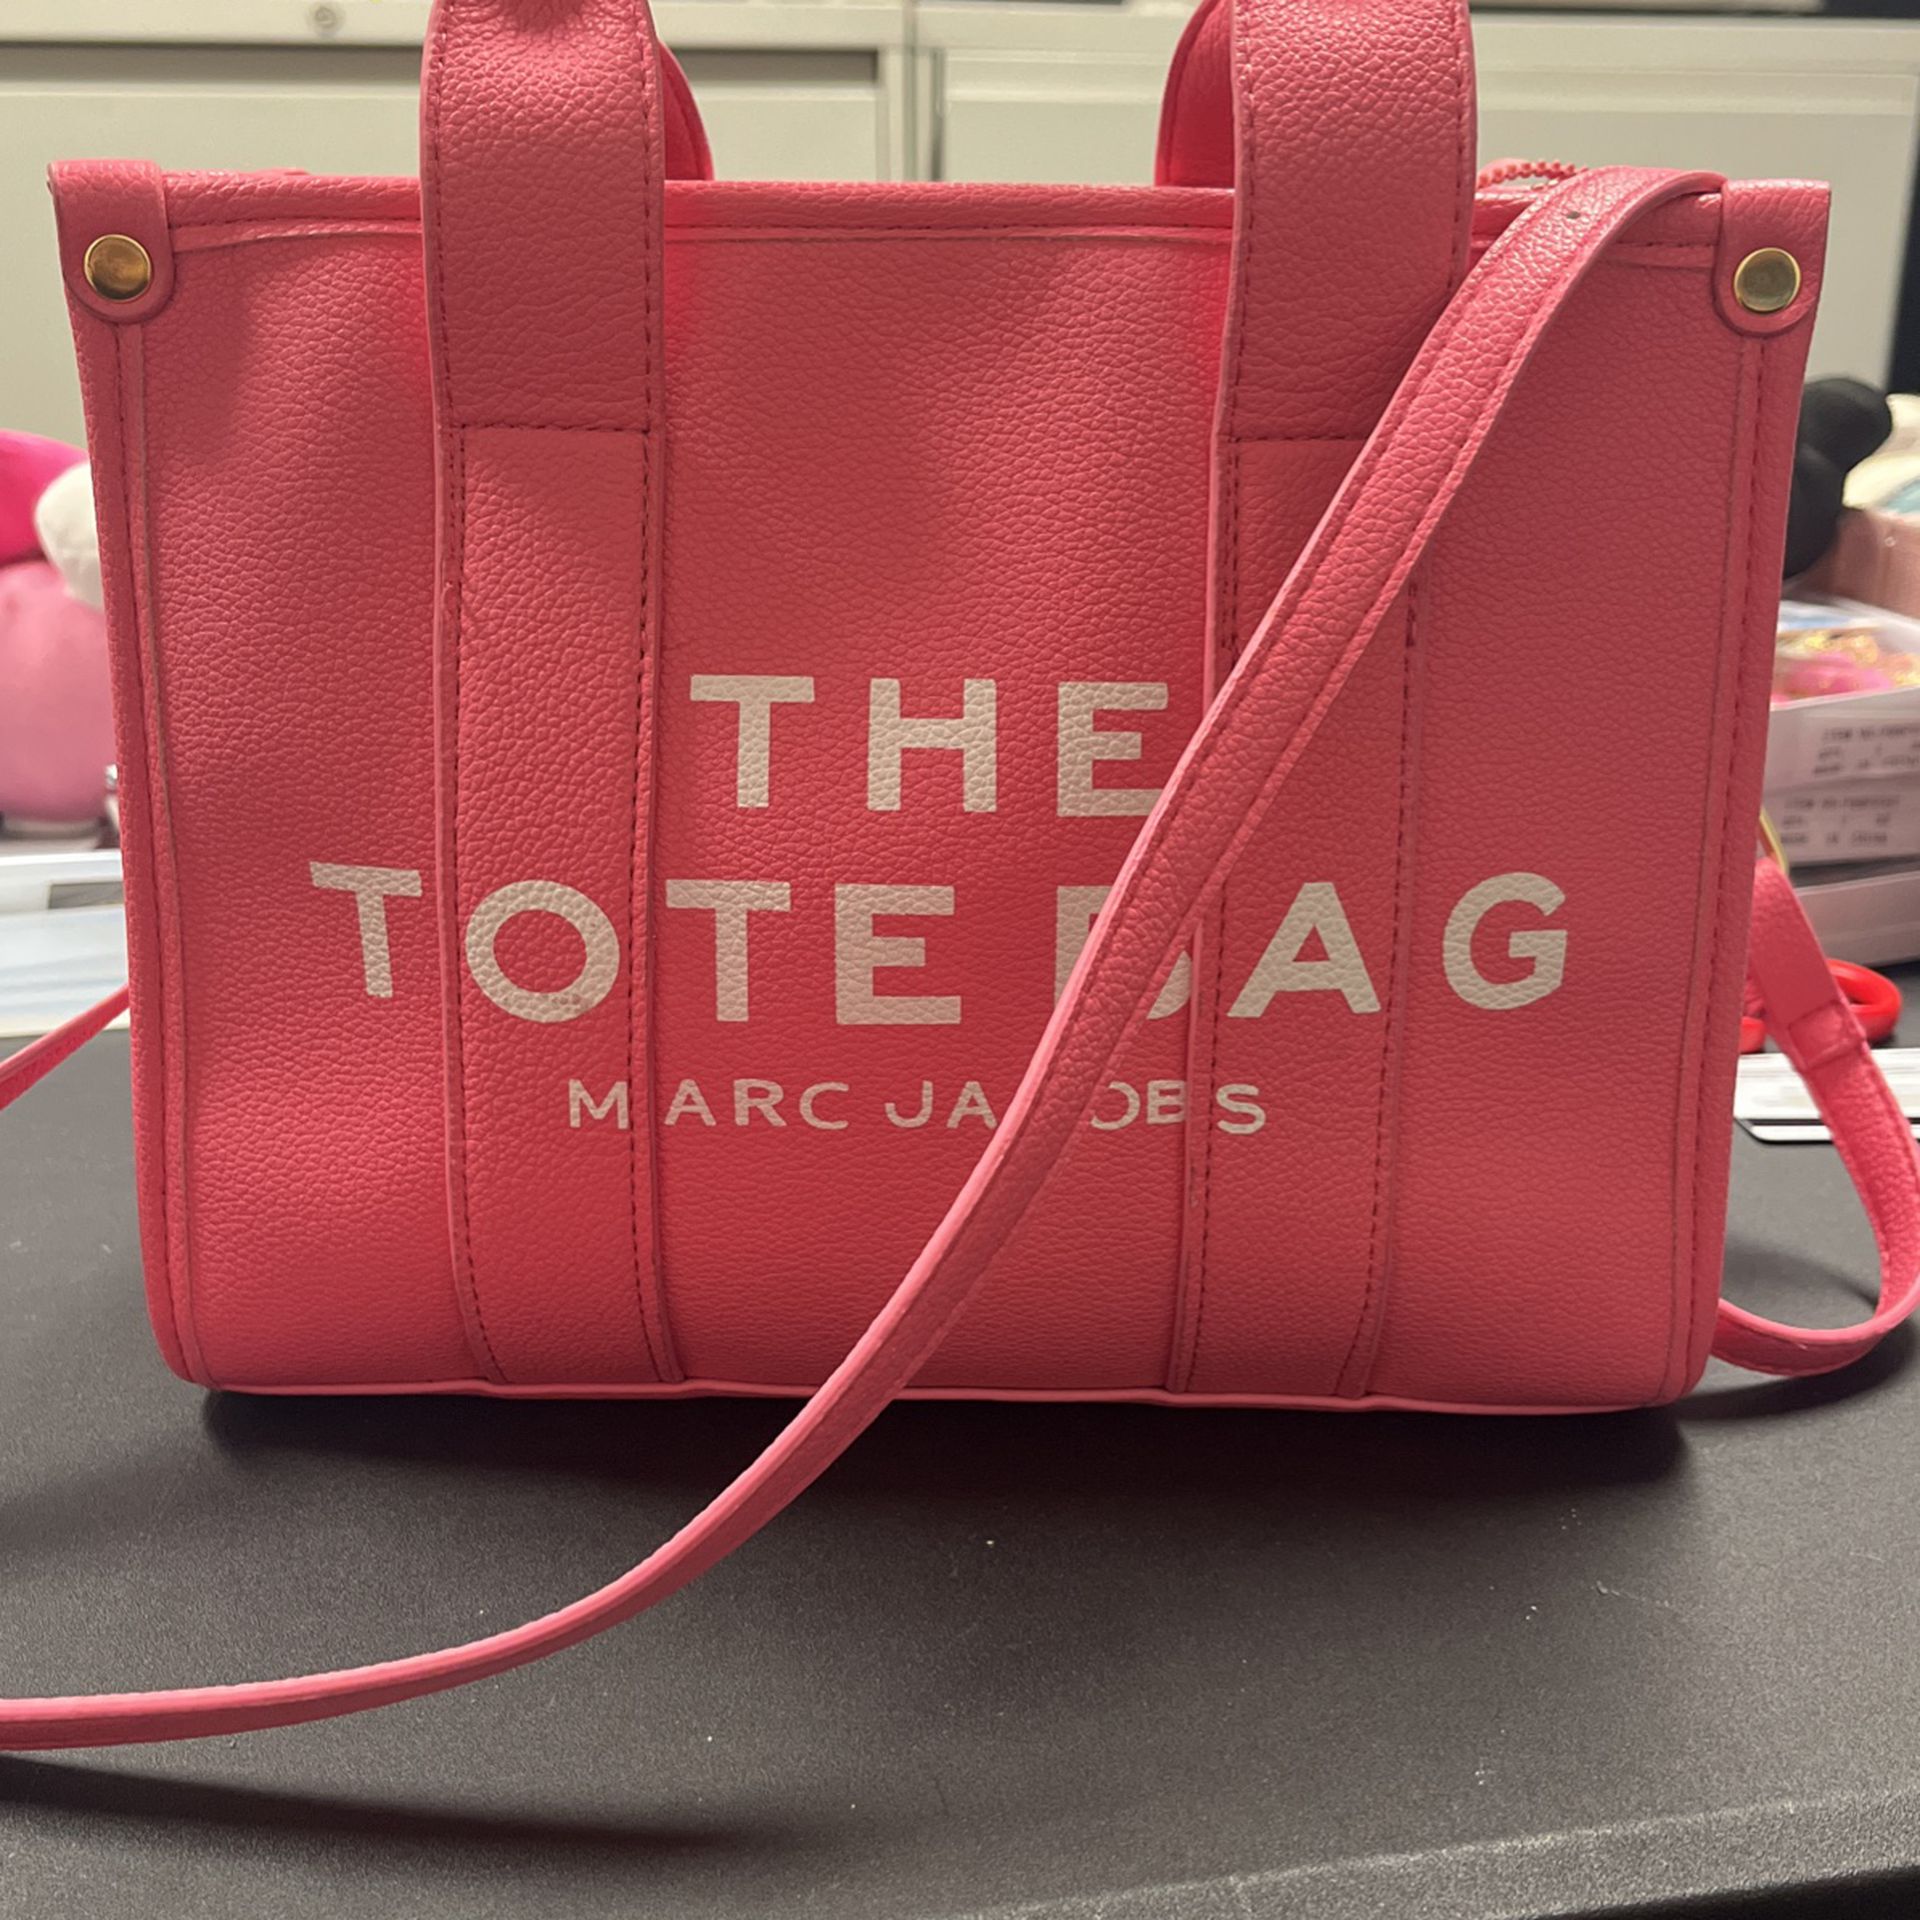 Marc Jacobes Pink Tote Bag